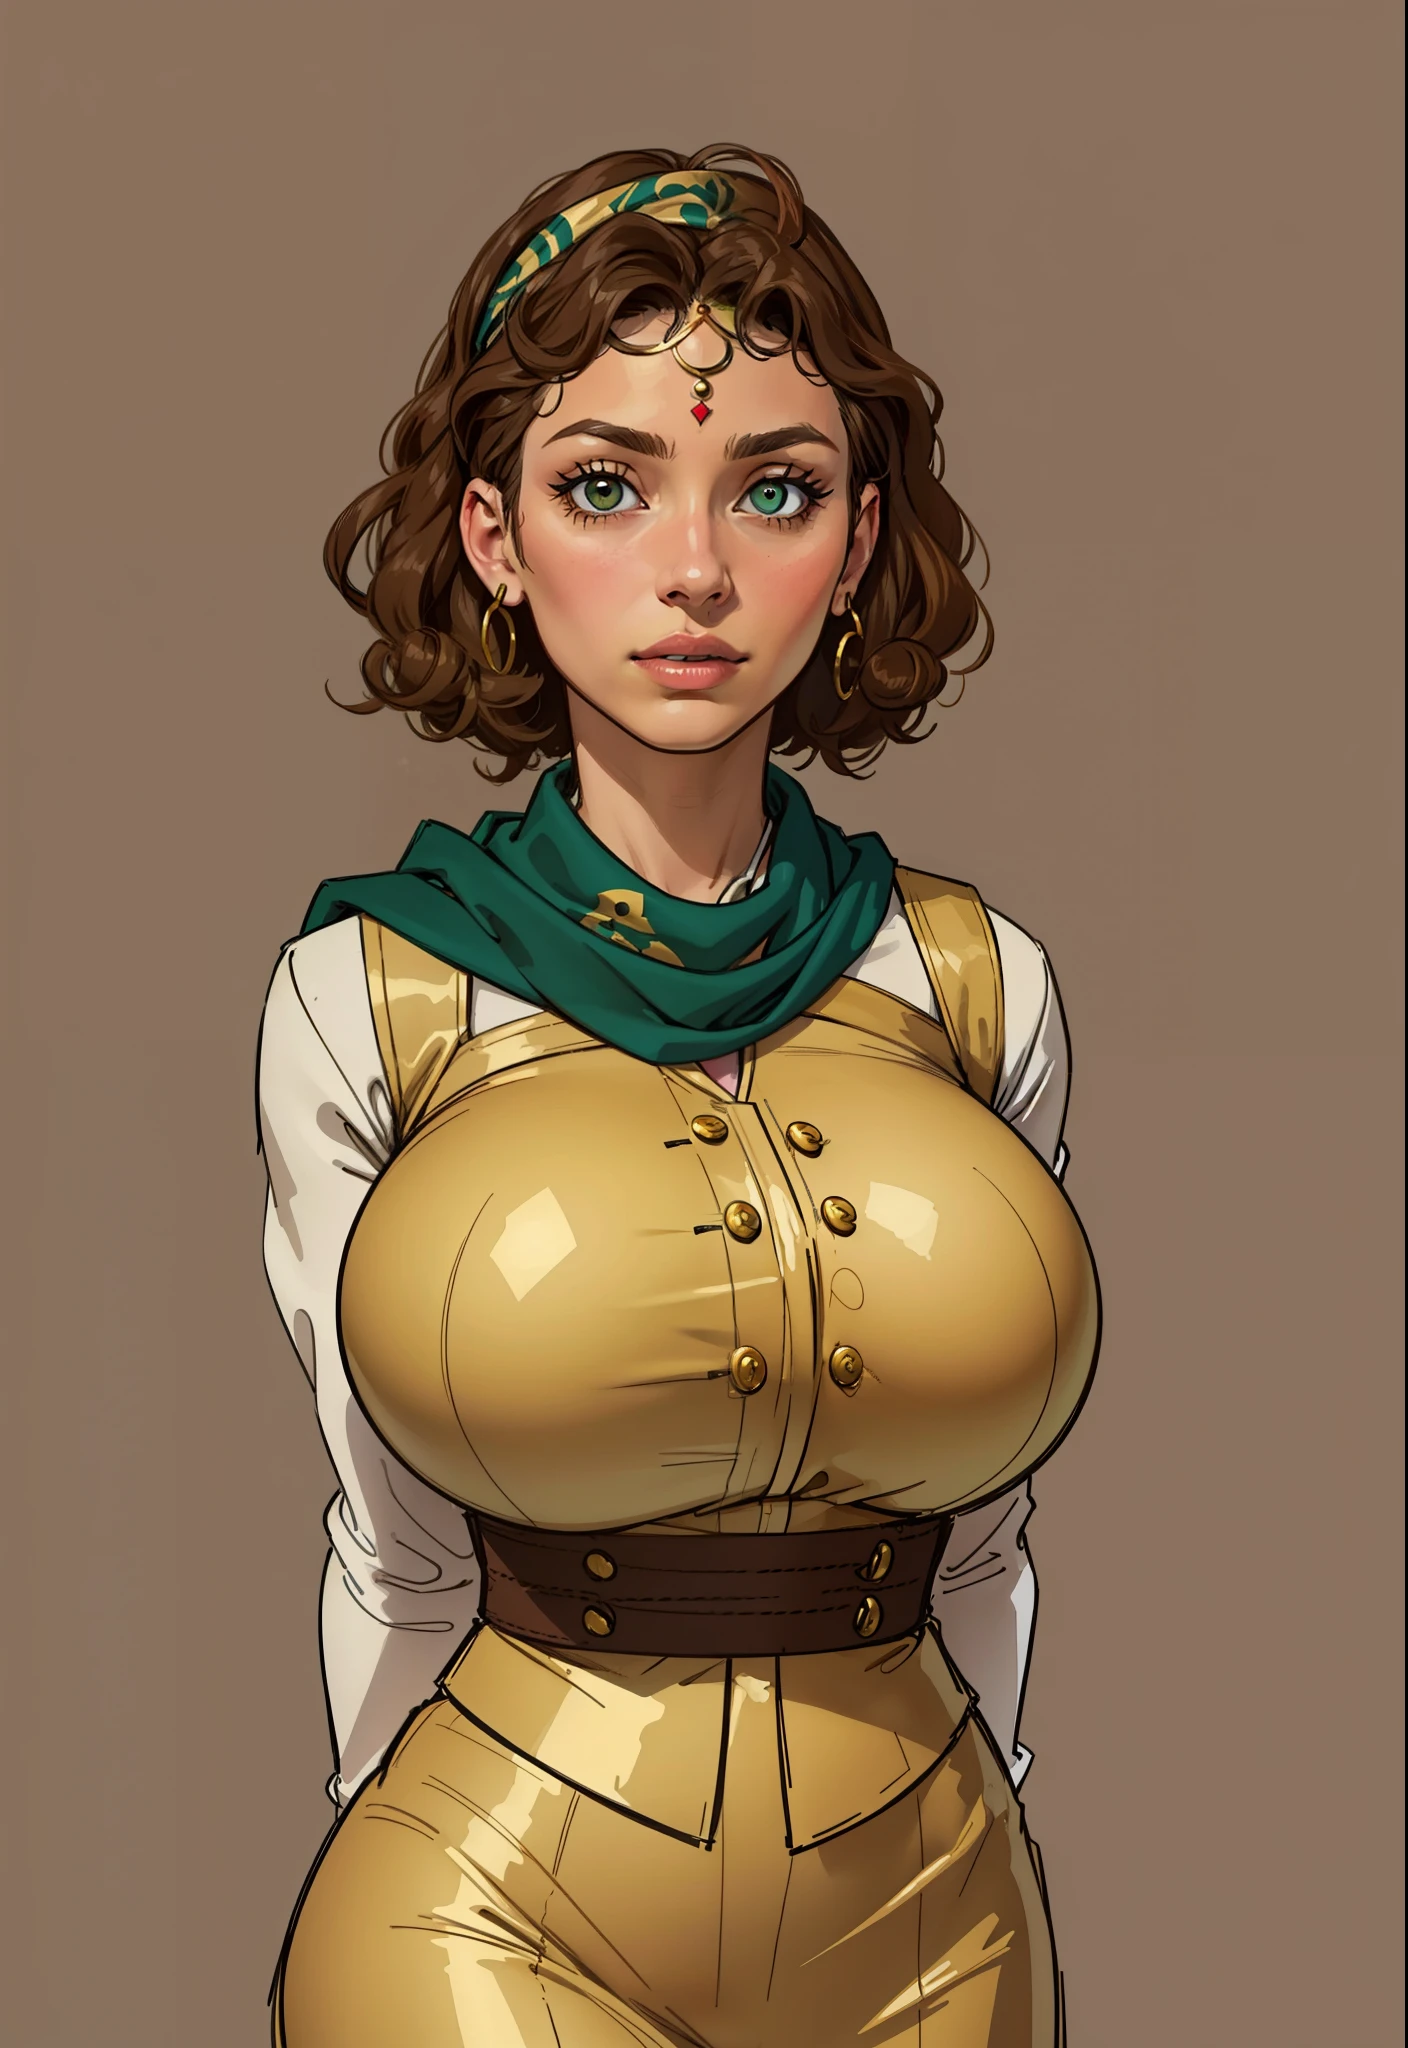 uma  pirates wearring realistic pirates cloths,30 years old, latina face looking up, ((curly hair)) , ((gigantic breasts)), (gypsy), brown skin, mature, short hair, Stand up, maquiagem, Lips are soft or colored,  light, uncontrasted,  flat wallpaper background, silhuetas simples, lineart, minimalist, green eyes, ((gold bandana on forehead))